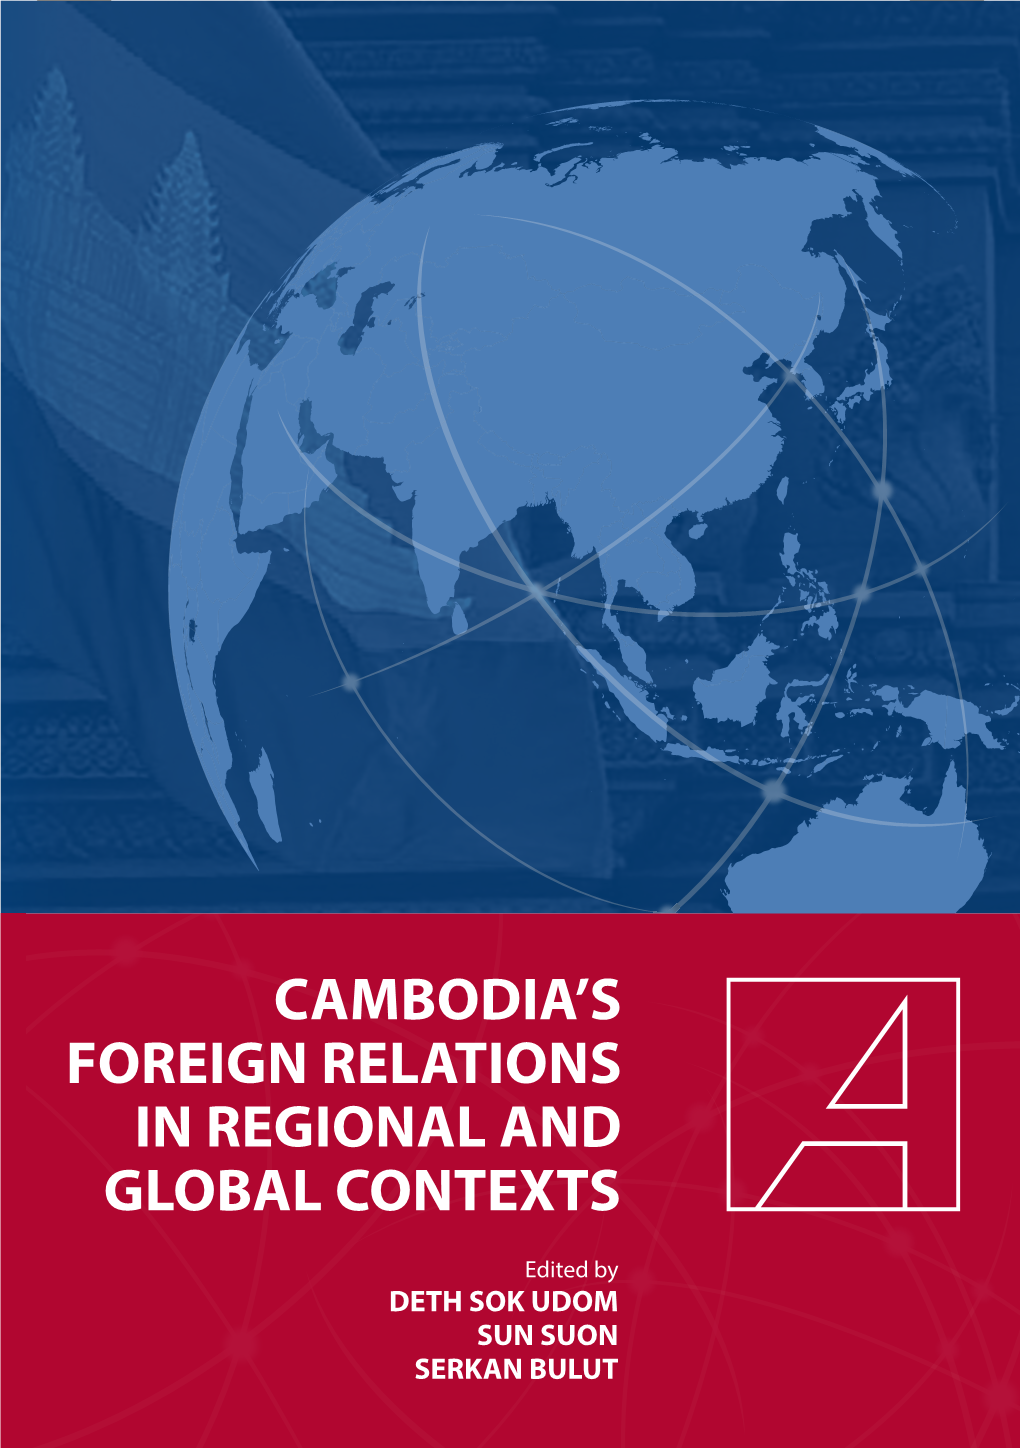 Cambodia's Foreign Relations in Regional and Global